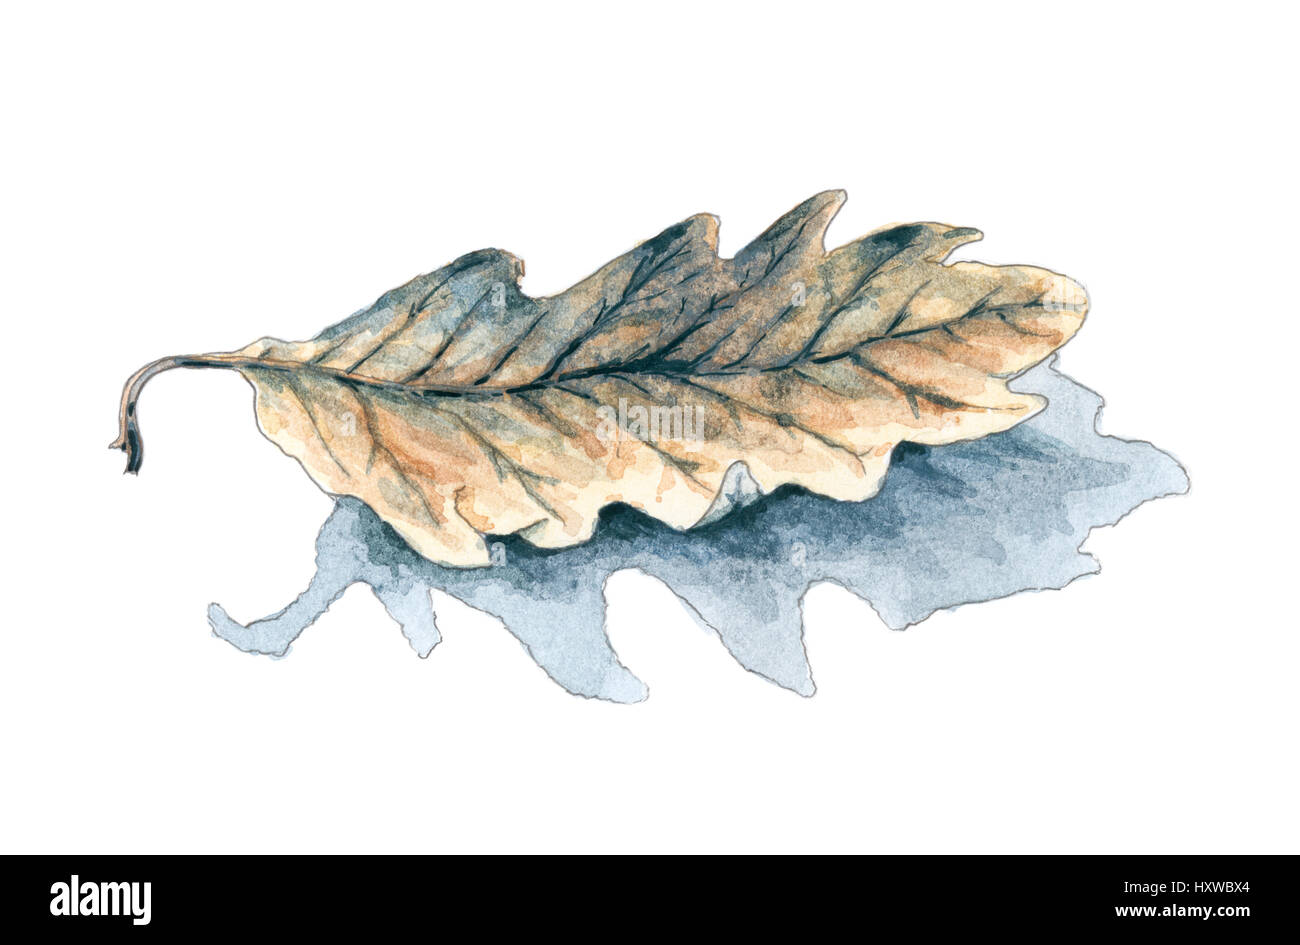 Fallen oak (Quercus) leaf with shadow over white background. Pencil and watercolor wash on rough paper. Stock Photo